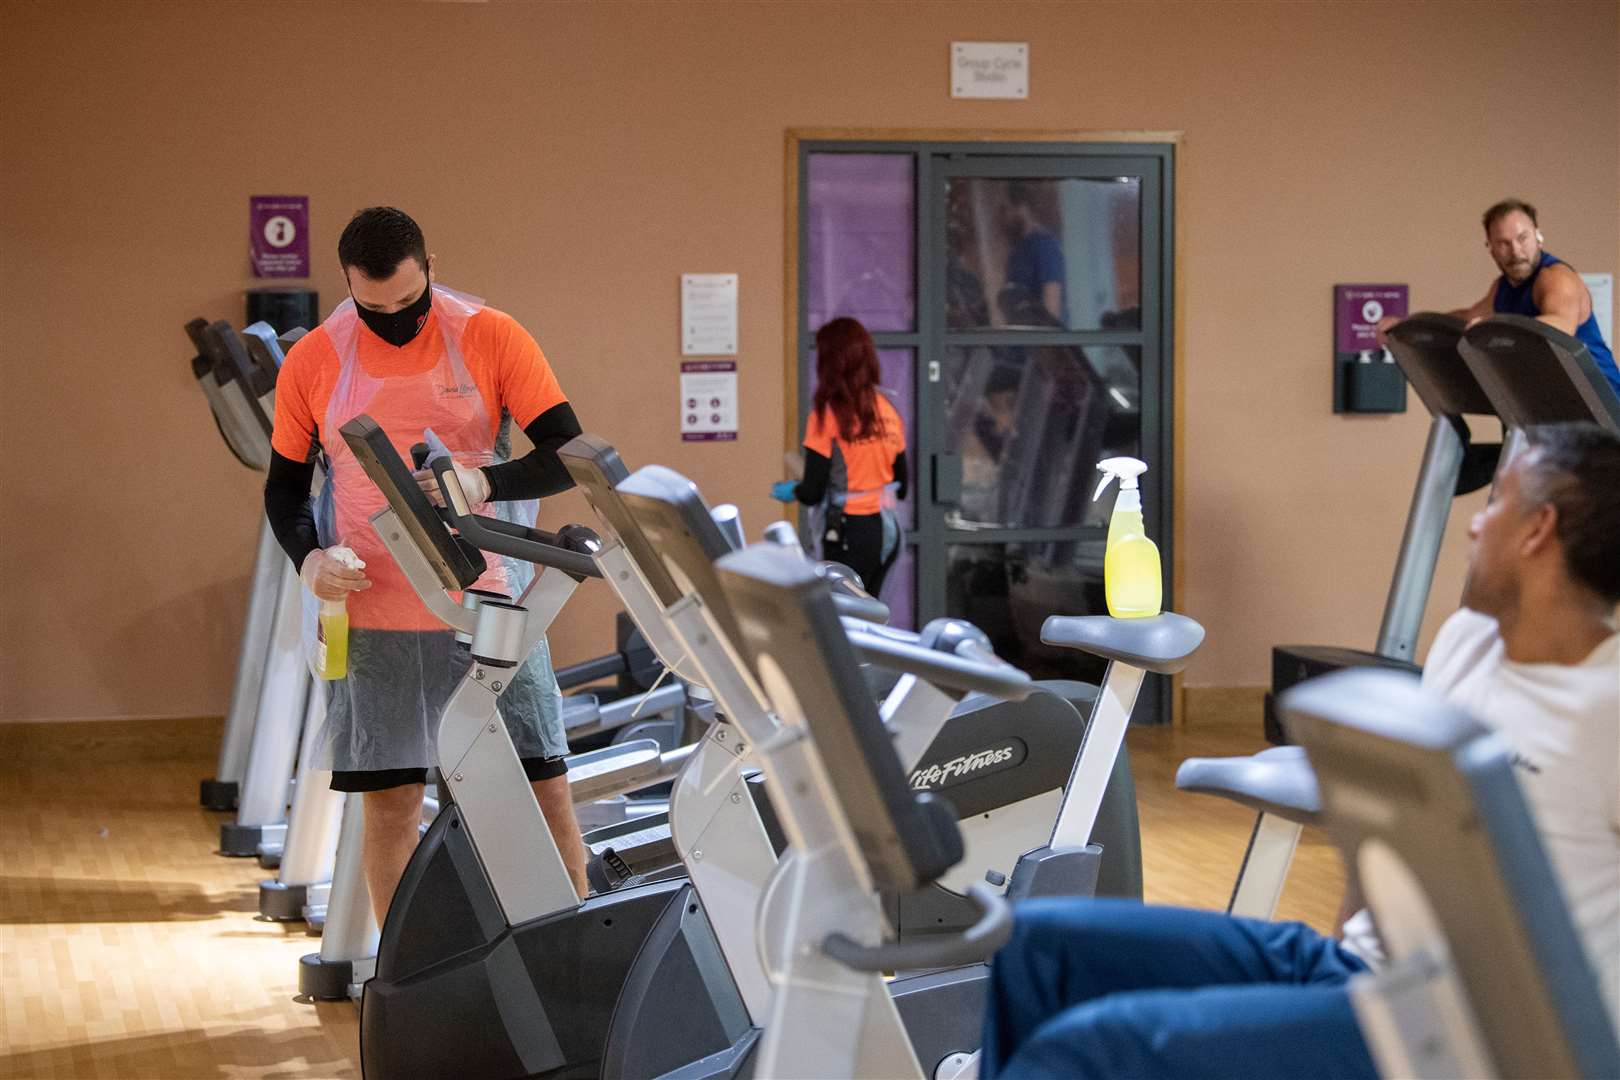 Members of staff clean gym equipment at David Lloyd health club in Leicester as they reopen after England’s second national lockdown ended (Joe Giddens/PA)